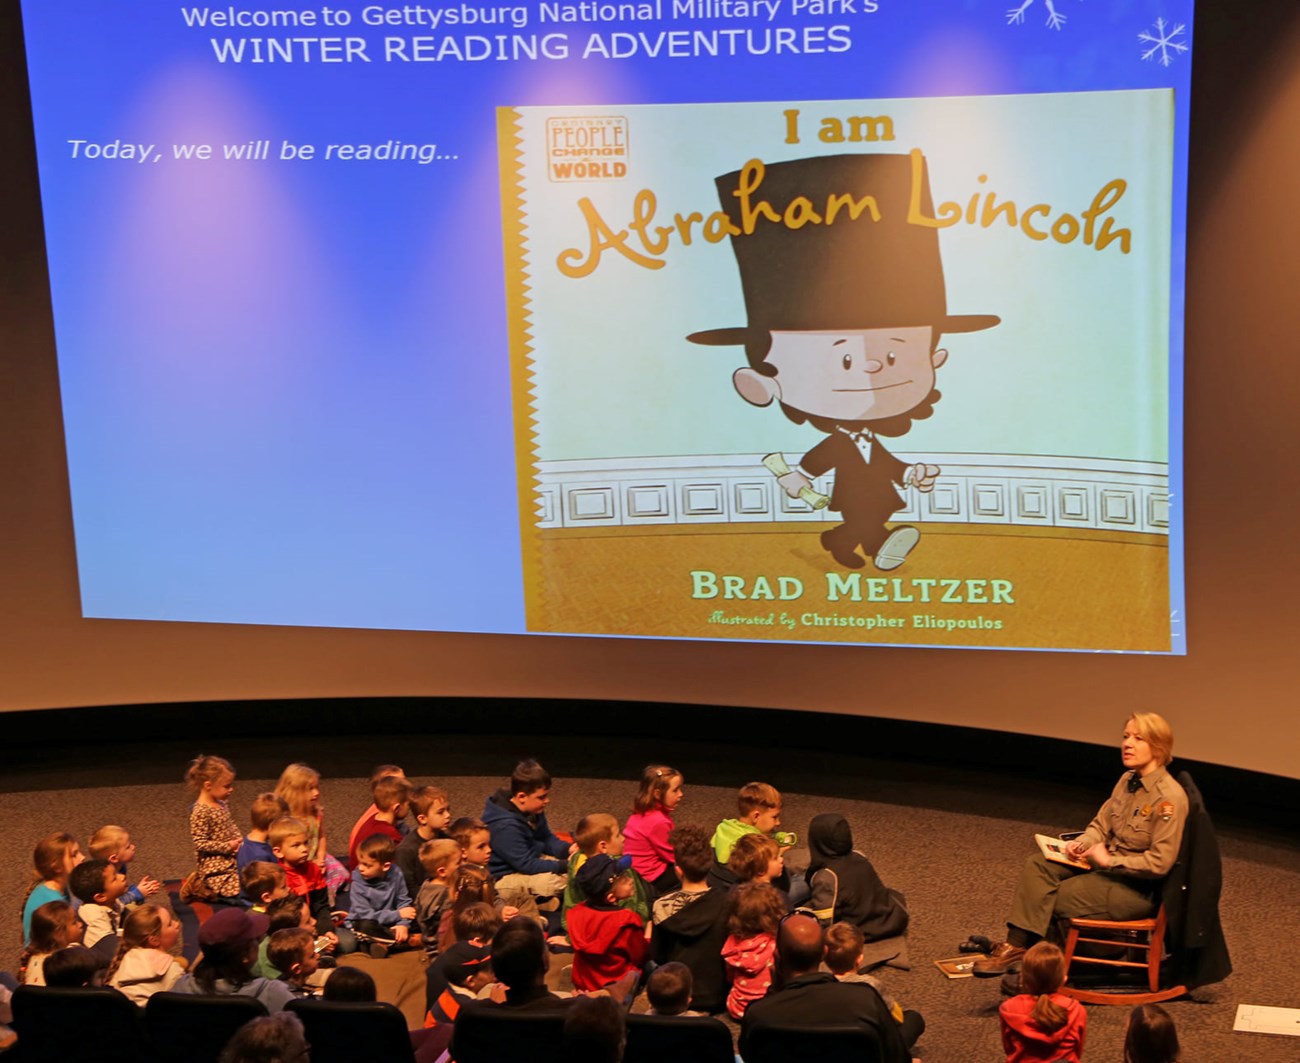 A Park Ranger reads to a group of small children. On the screen is the cover of the book I am Abraham Lincoln